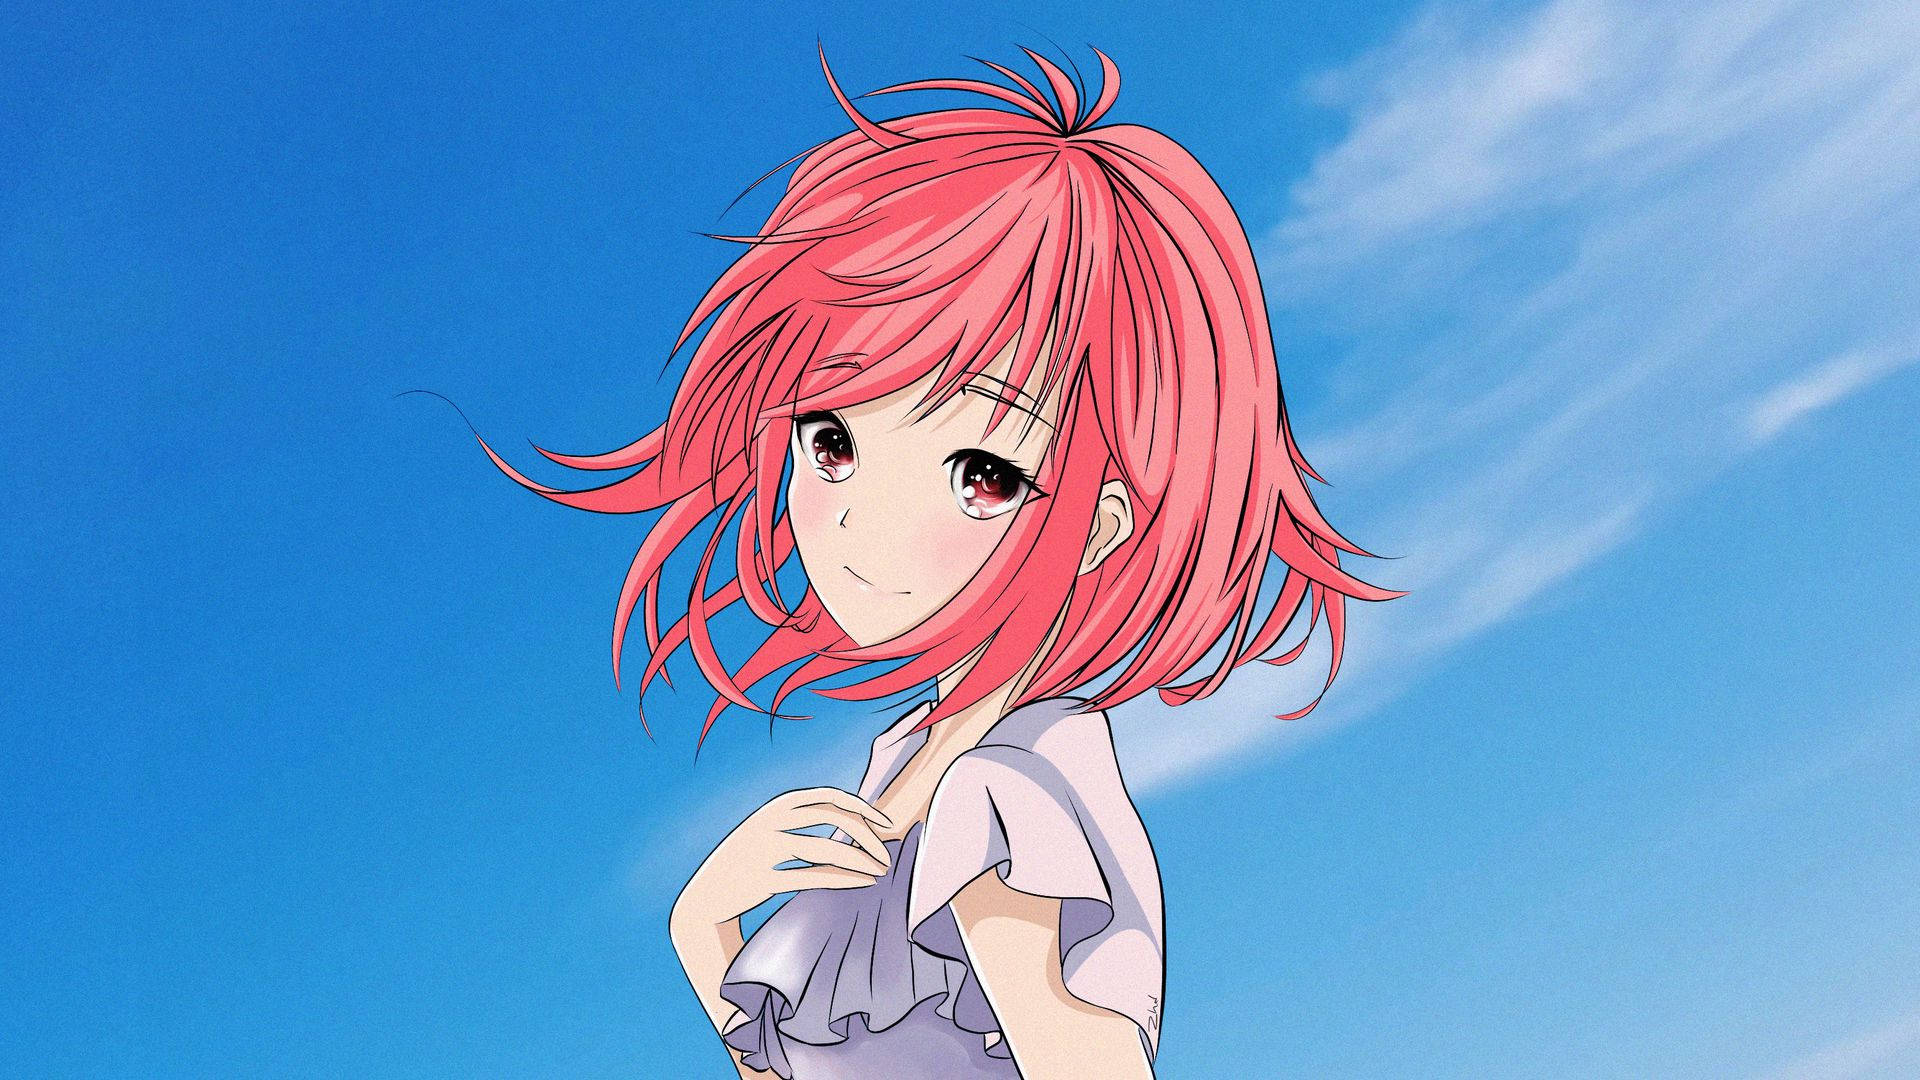 Cute Anime Girl With Pink Hair